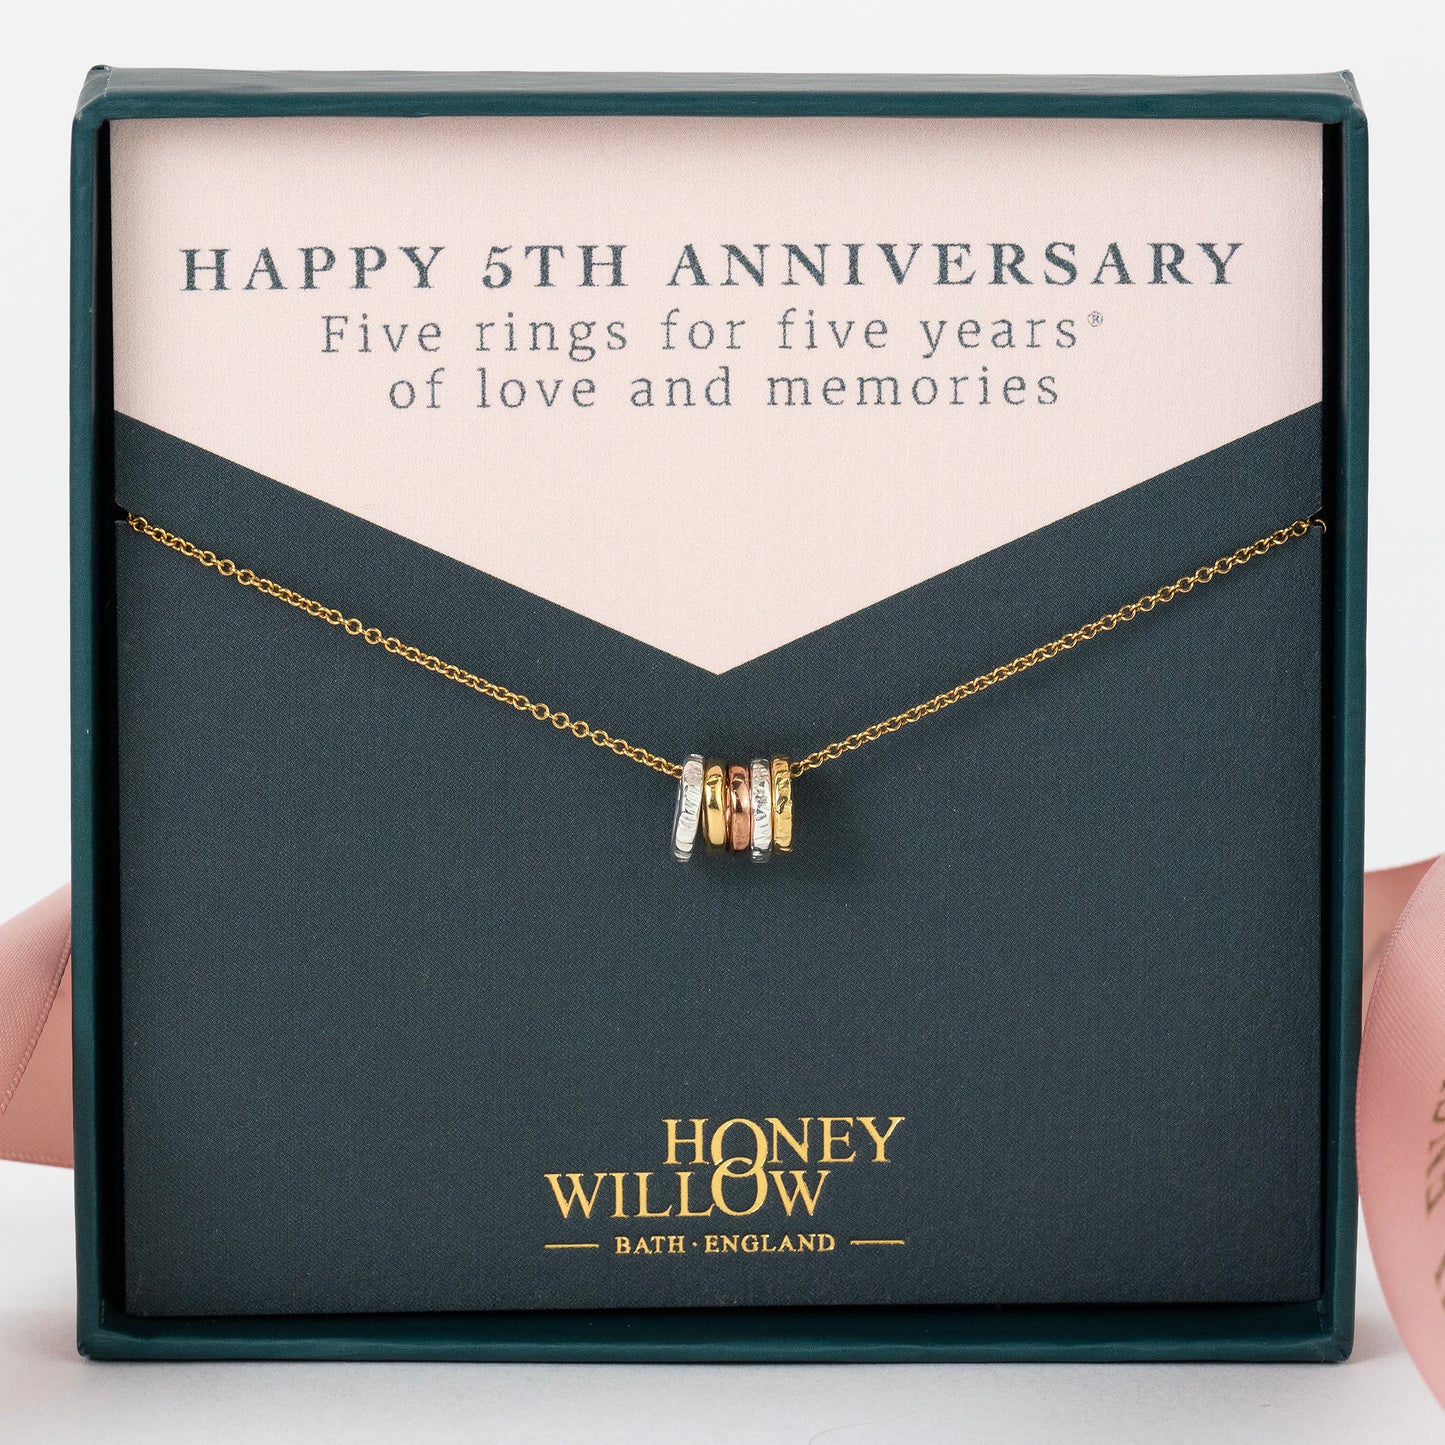 5th Anniversary Necklace - 5 Rings for 5 Years - Tiny Links